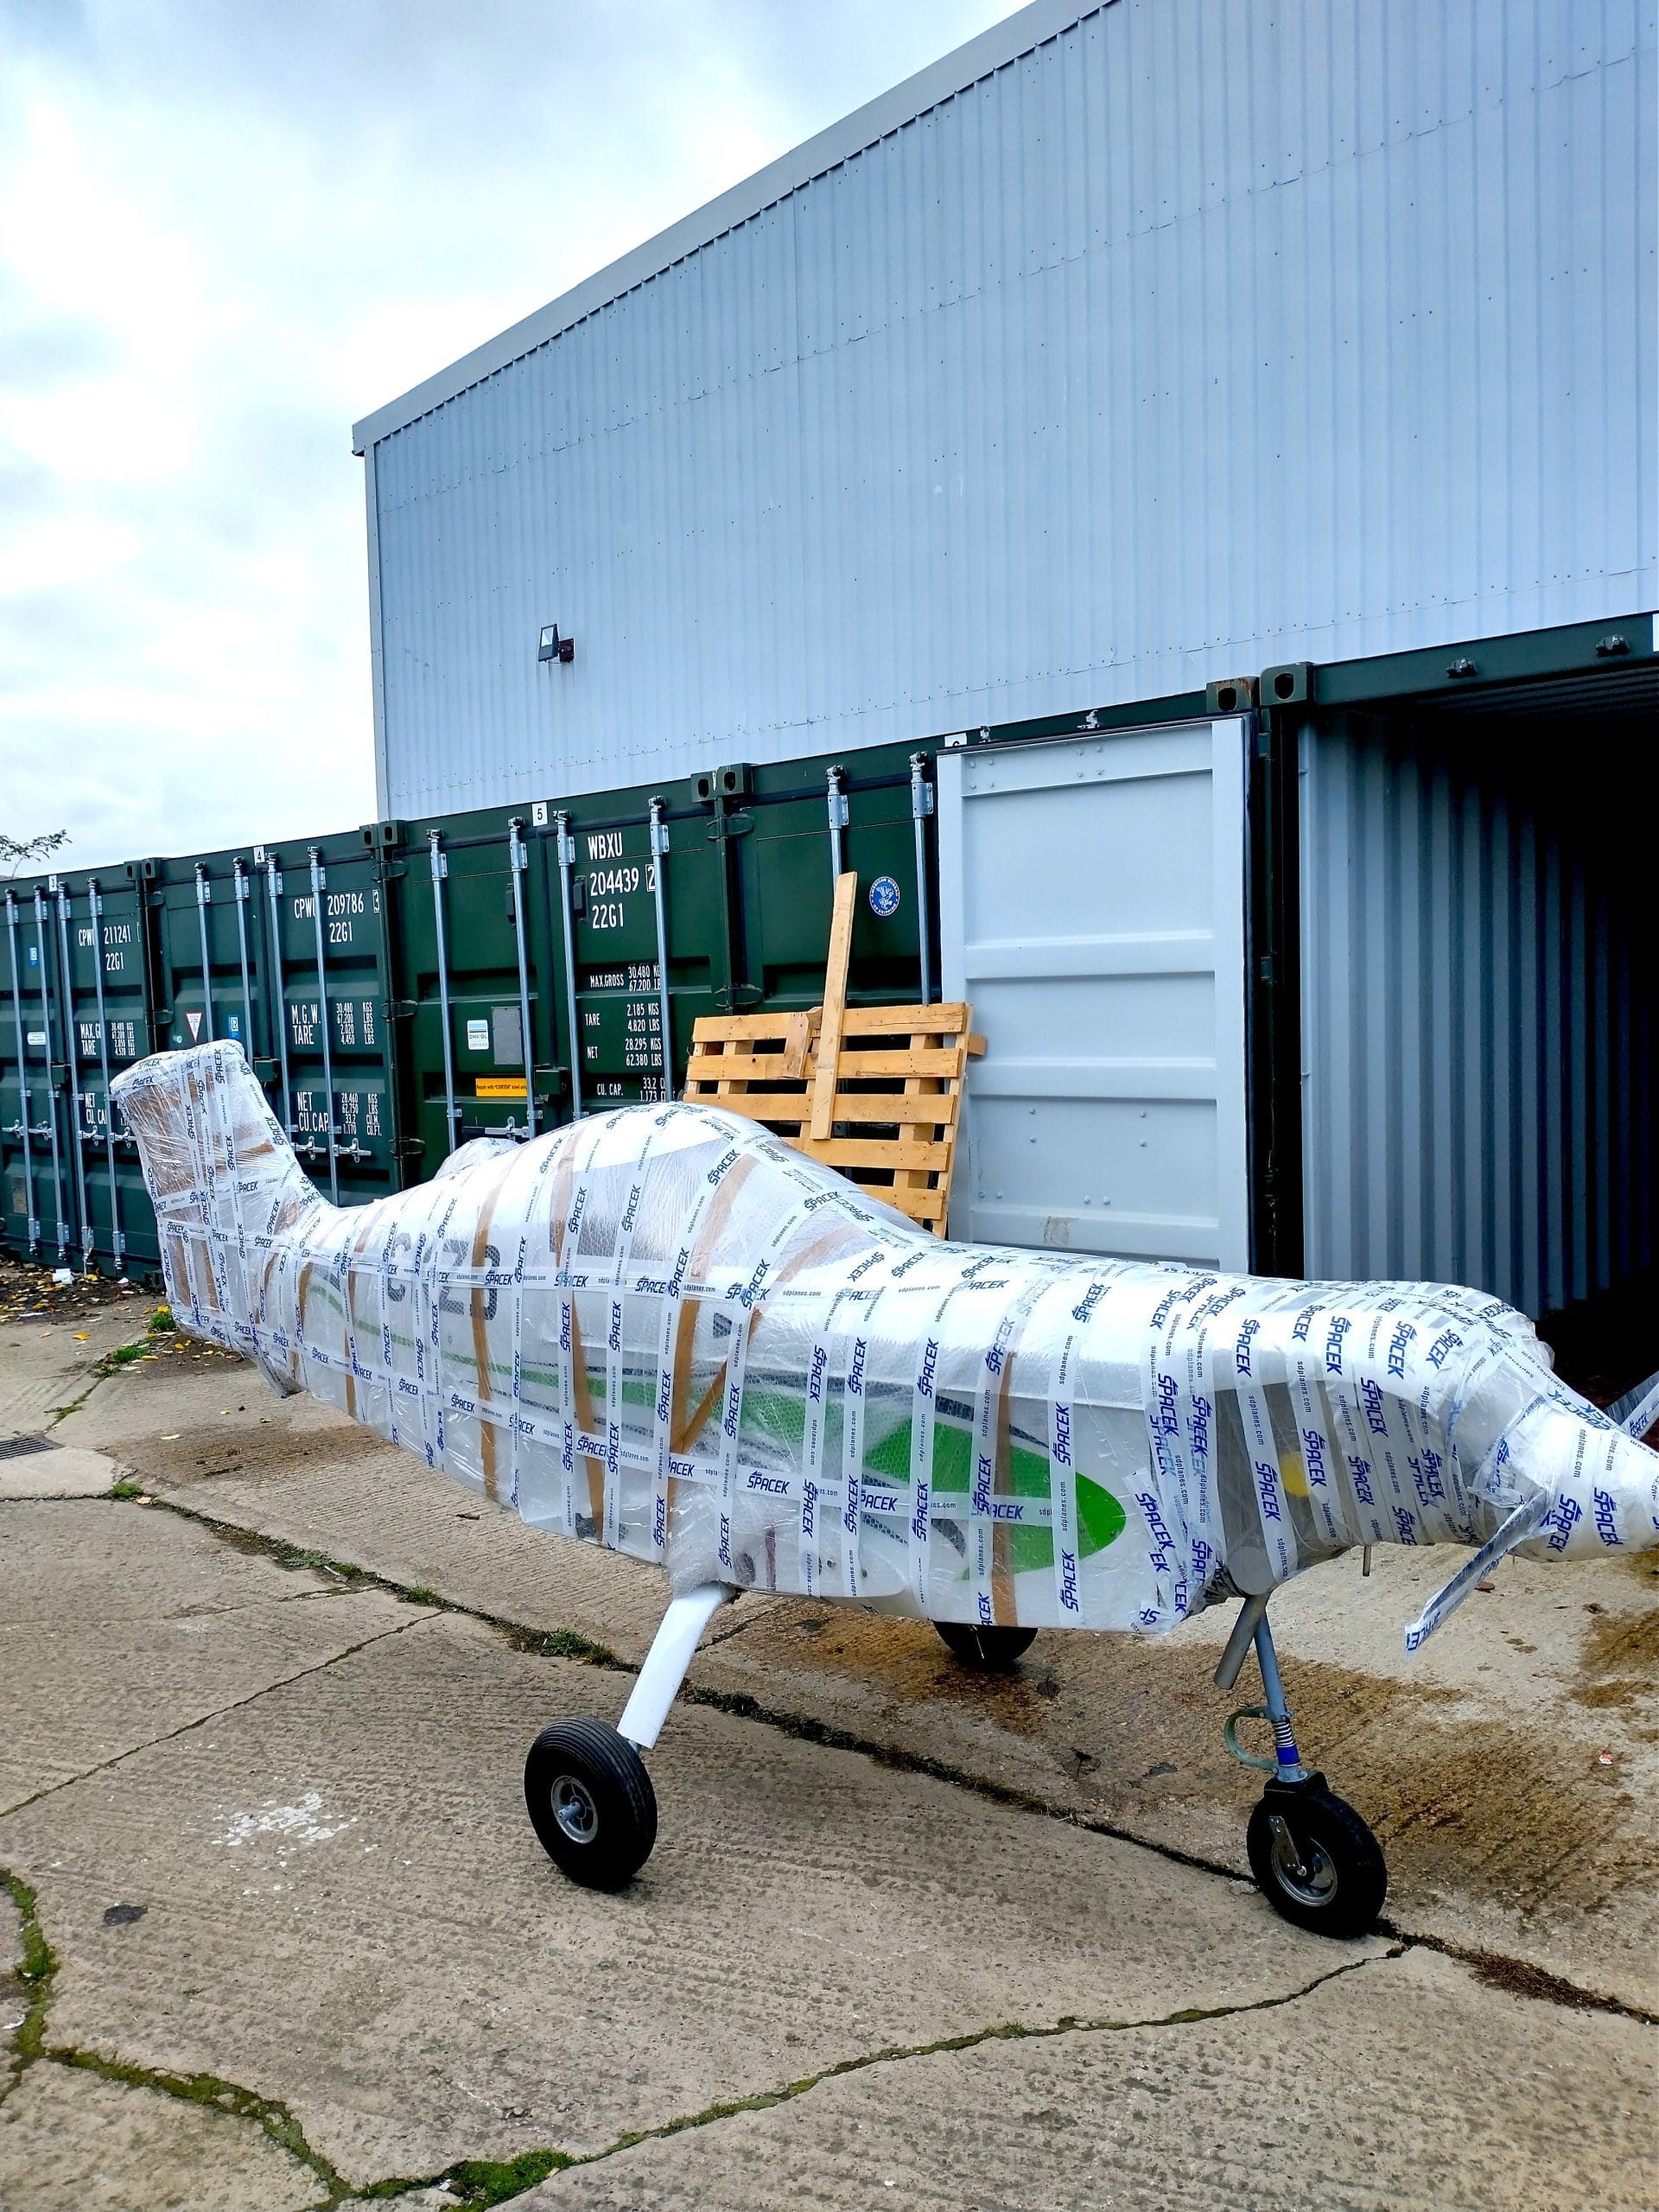 Wrapped up plane outside storage facility